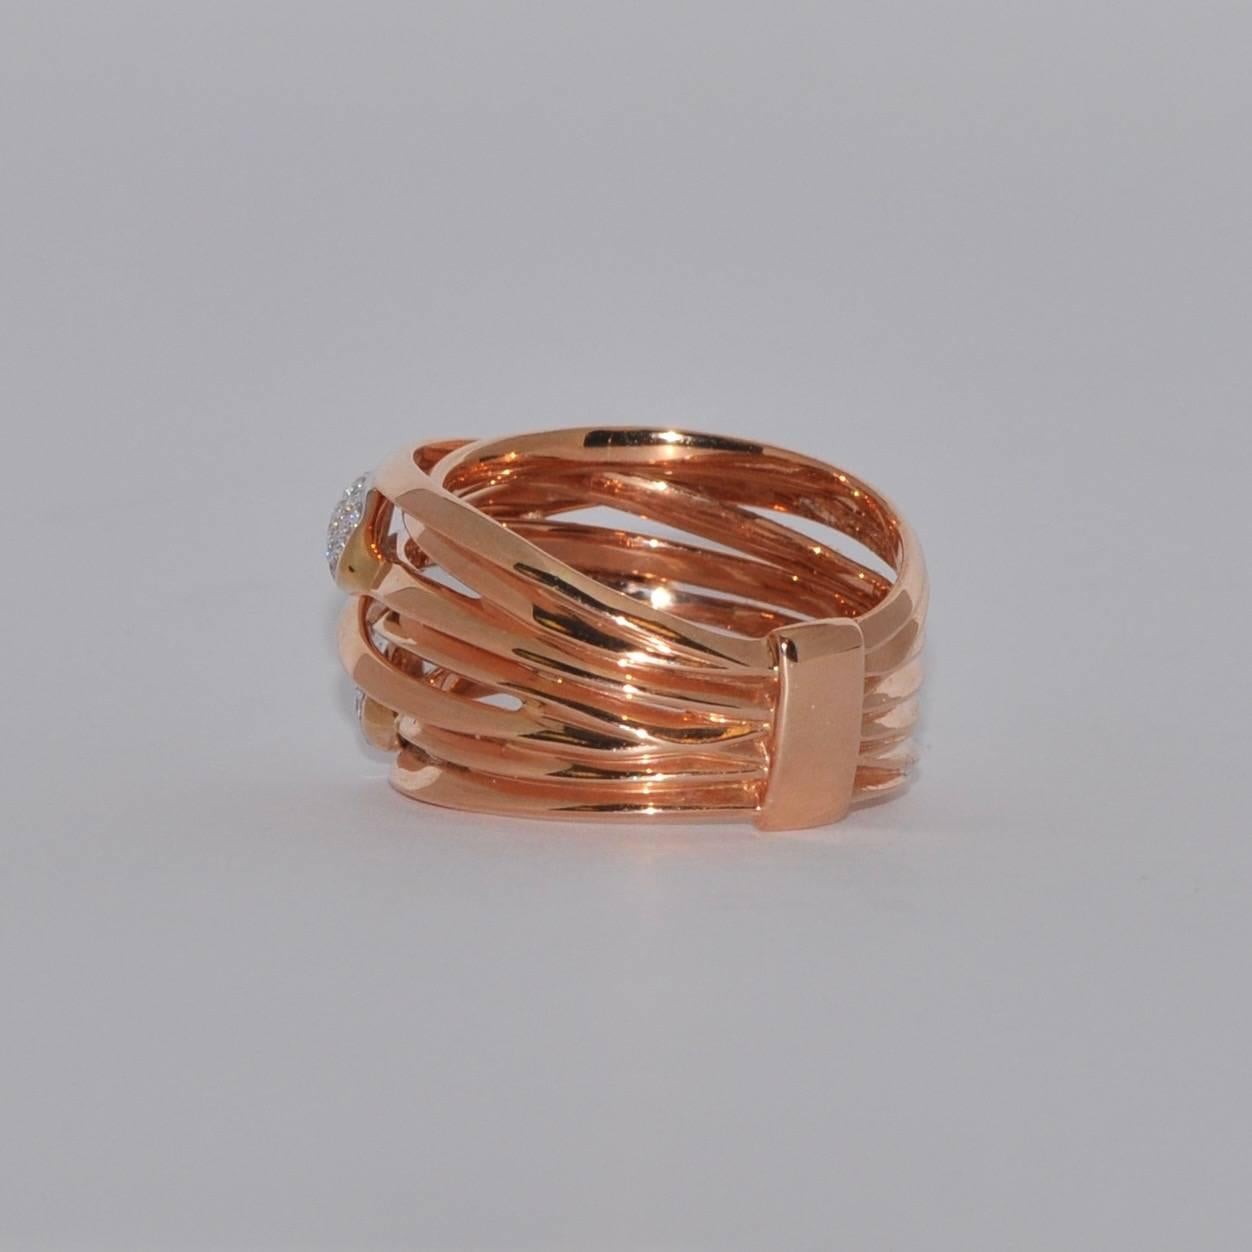 Discover this Diamonds 0.32 Carat and Rose Gold 18 Carat Cocktail Ring.
Diamonds Brilliants 0.32 Carat
Rose Gold 18 Carat
French Size 54/ US Size 6 3/4